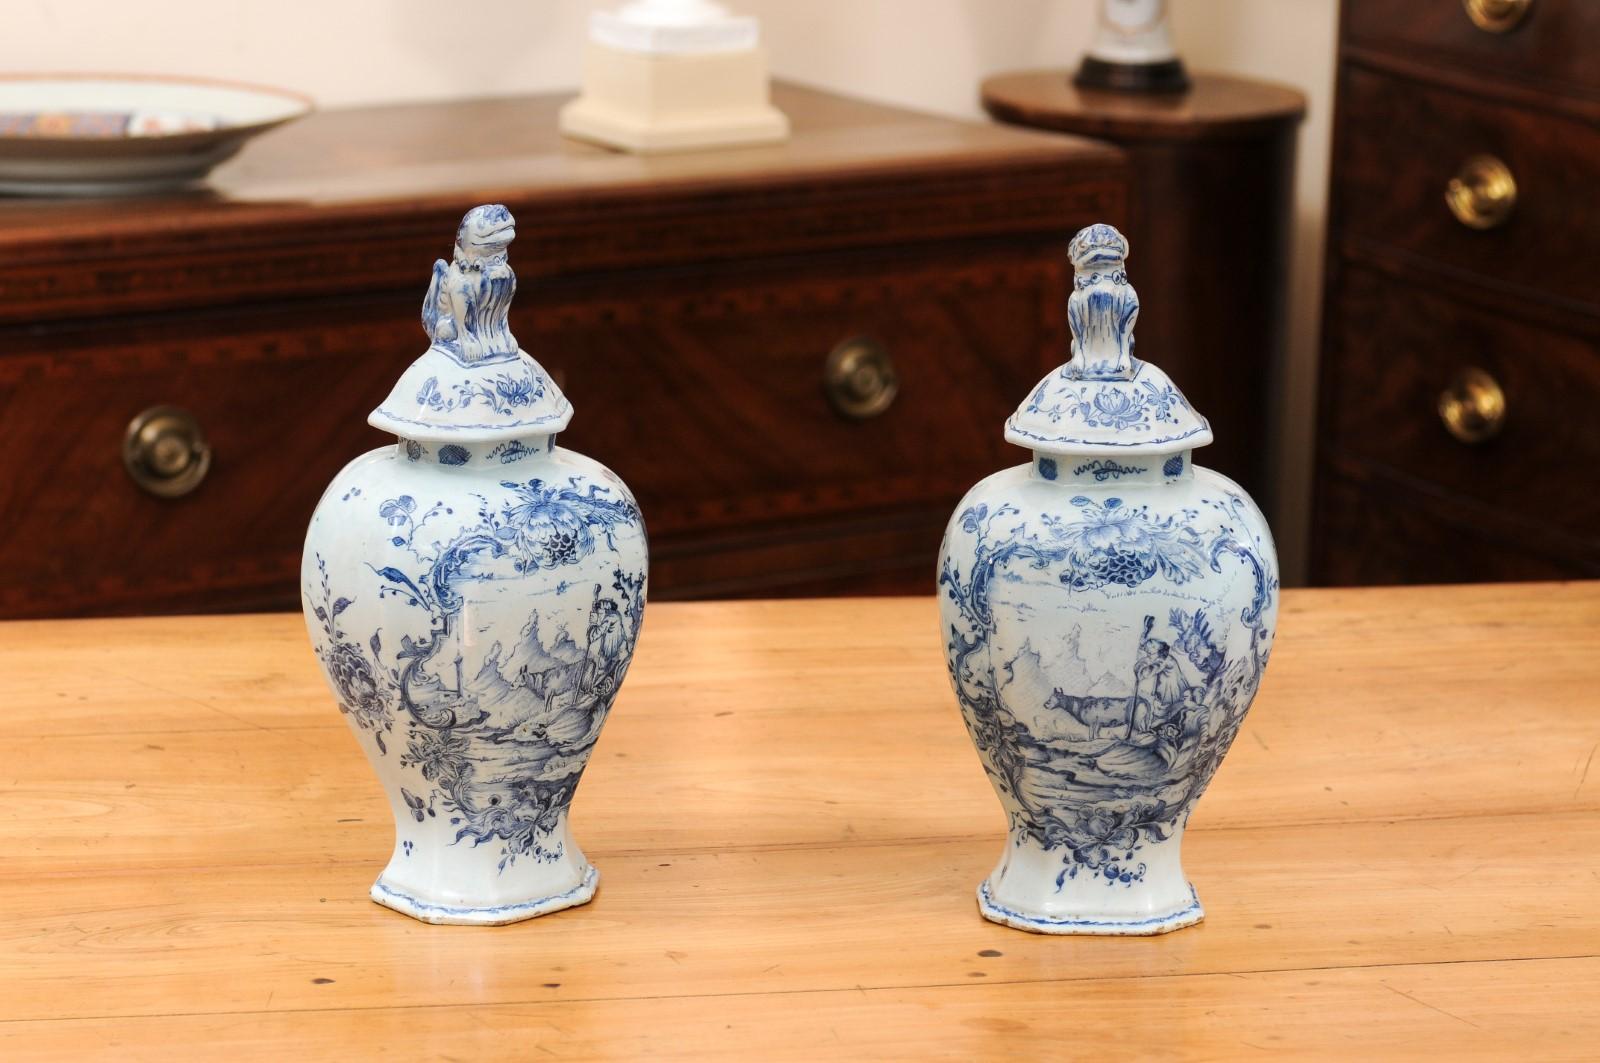 Pair of Late 18th Century Italian Porcelain Garniture Urns with Lids For Sale 1